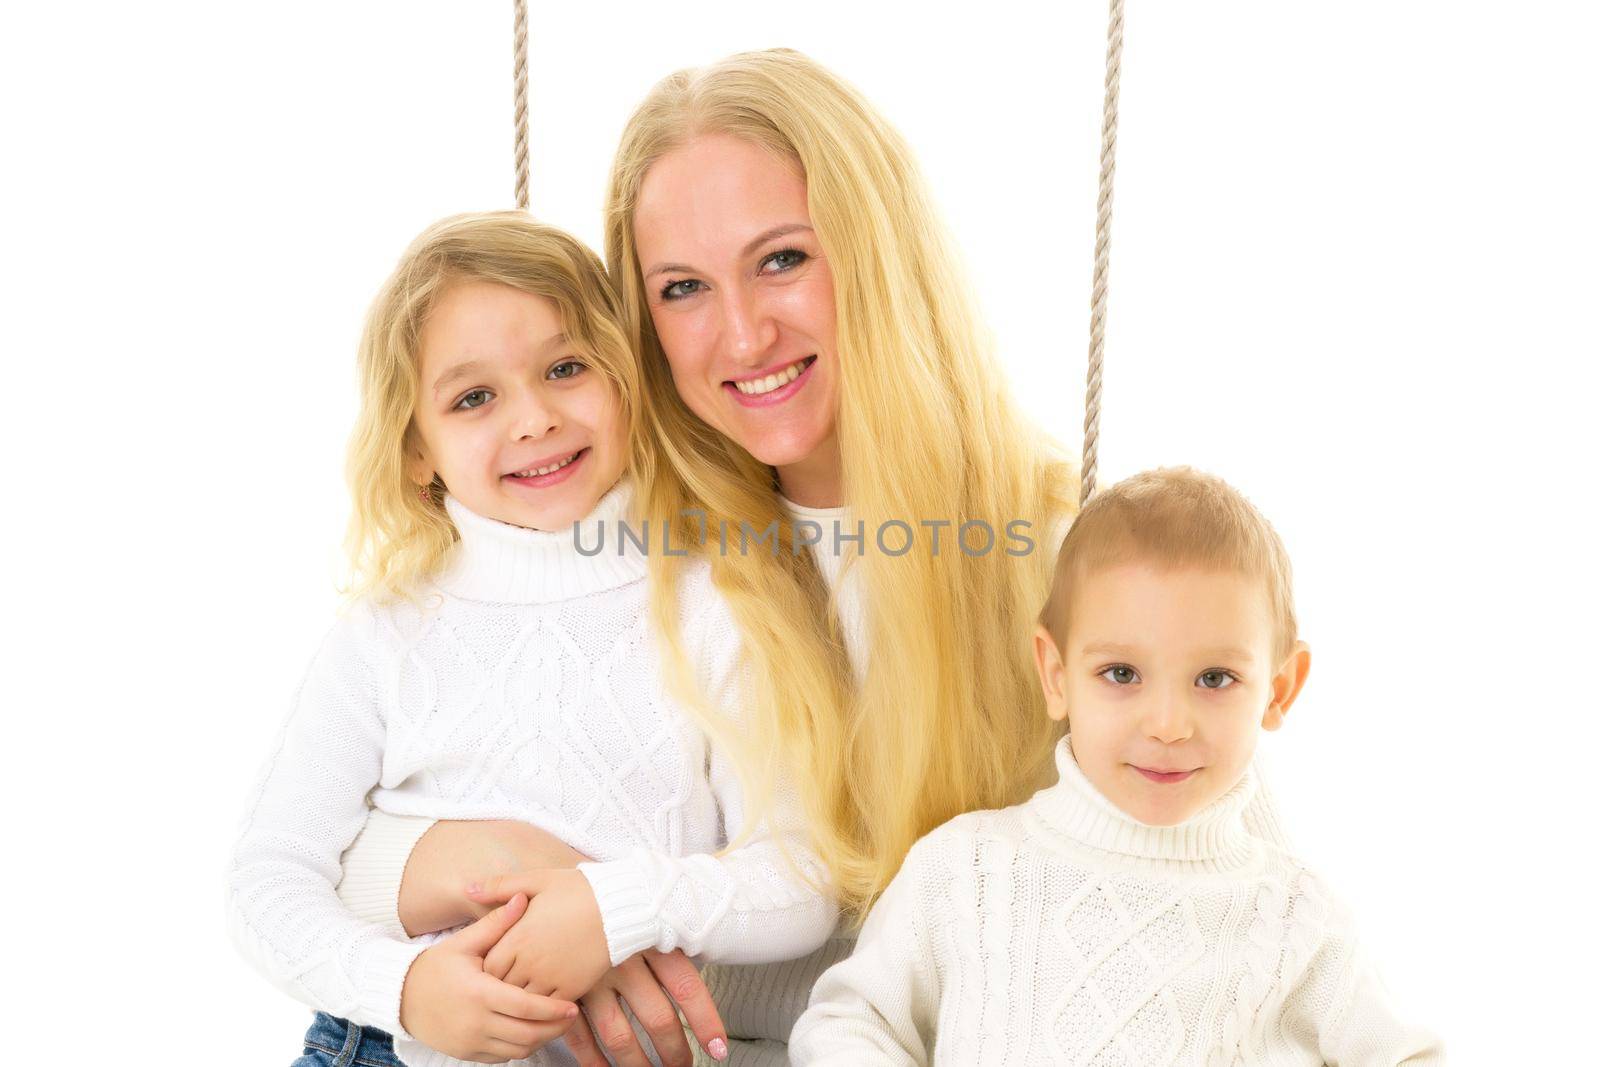 Happy Family of Mother and Two Kids Sitting Together on Rope Swing, Smiling Mom Hugging Her Son and Daughter Wearing White Sweaters and Jeans, Family Portrait Isolated on White Background